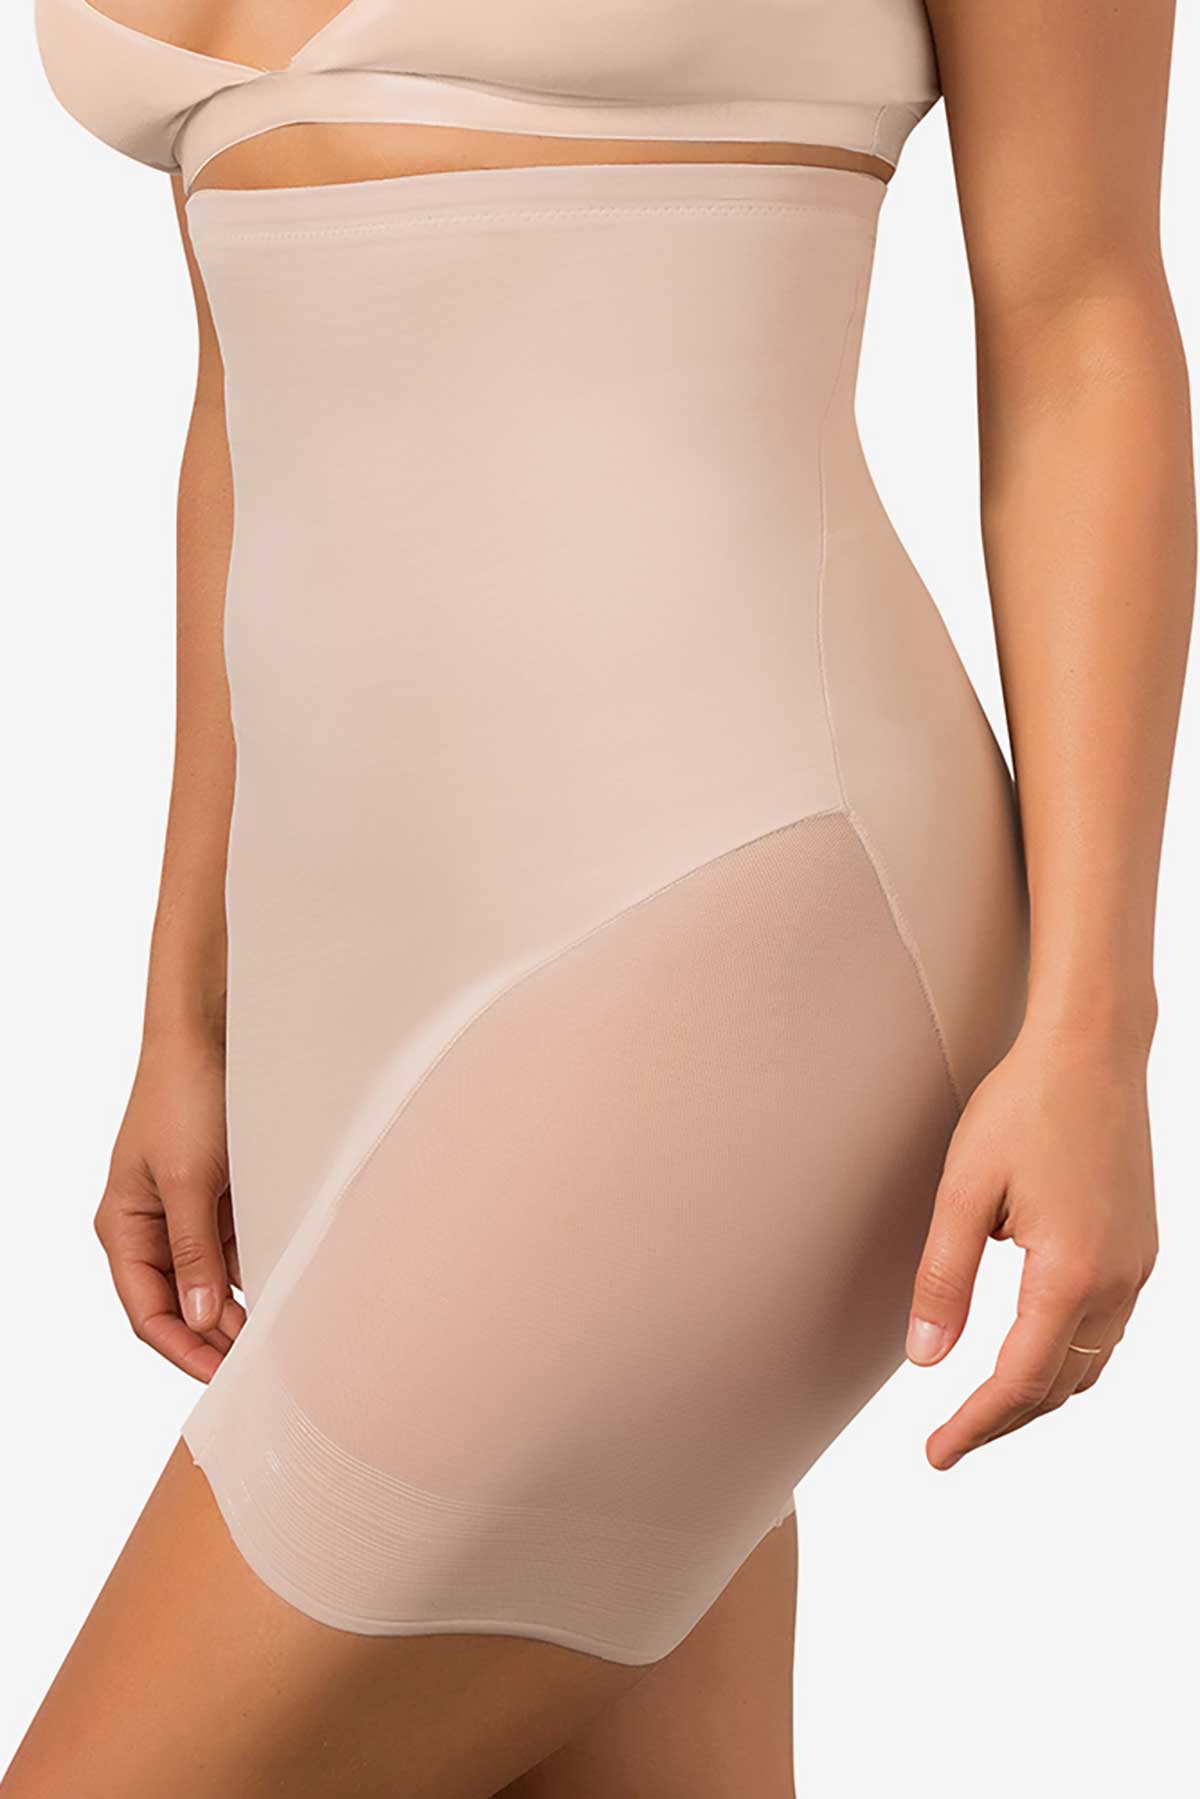 Miraclesuit Women's Extra Firm Tummy-Control High Waist Sheer Half